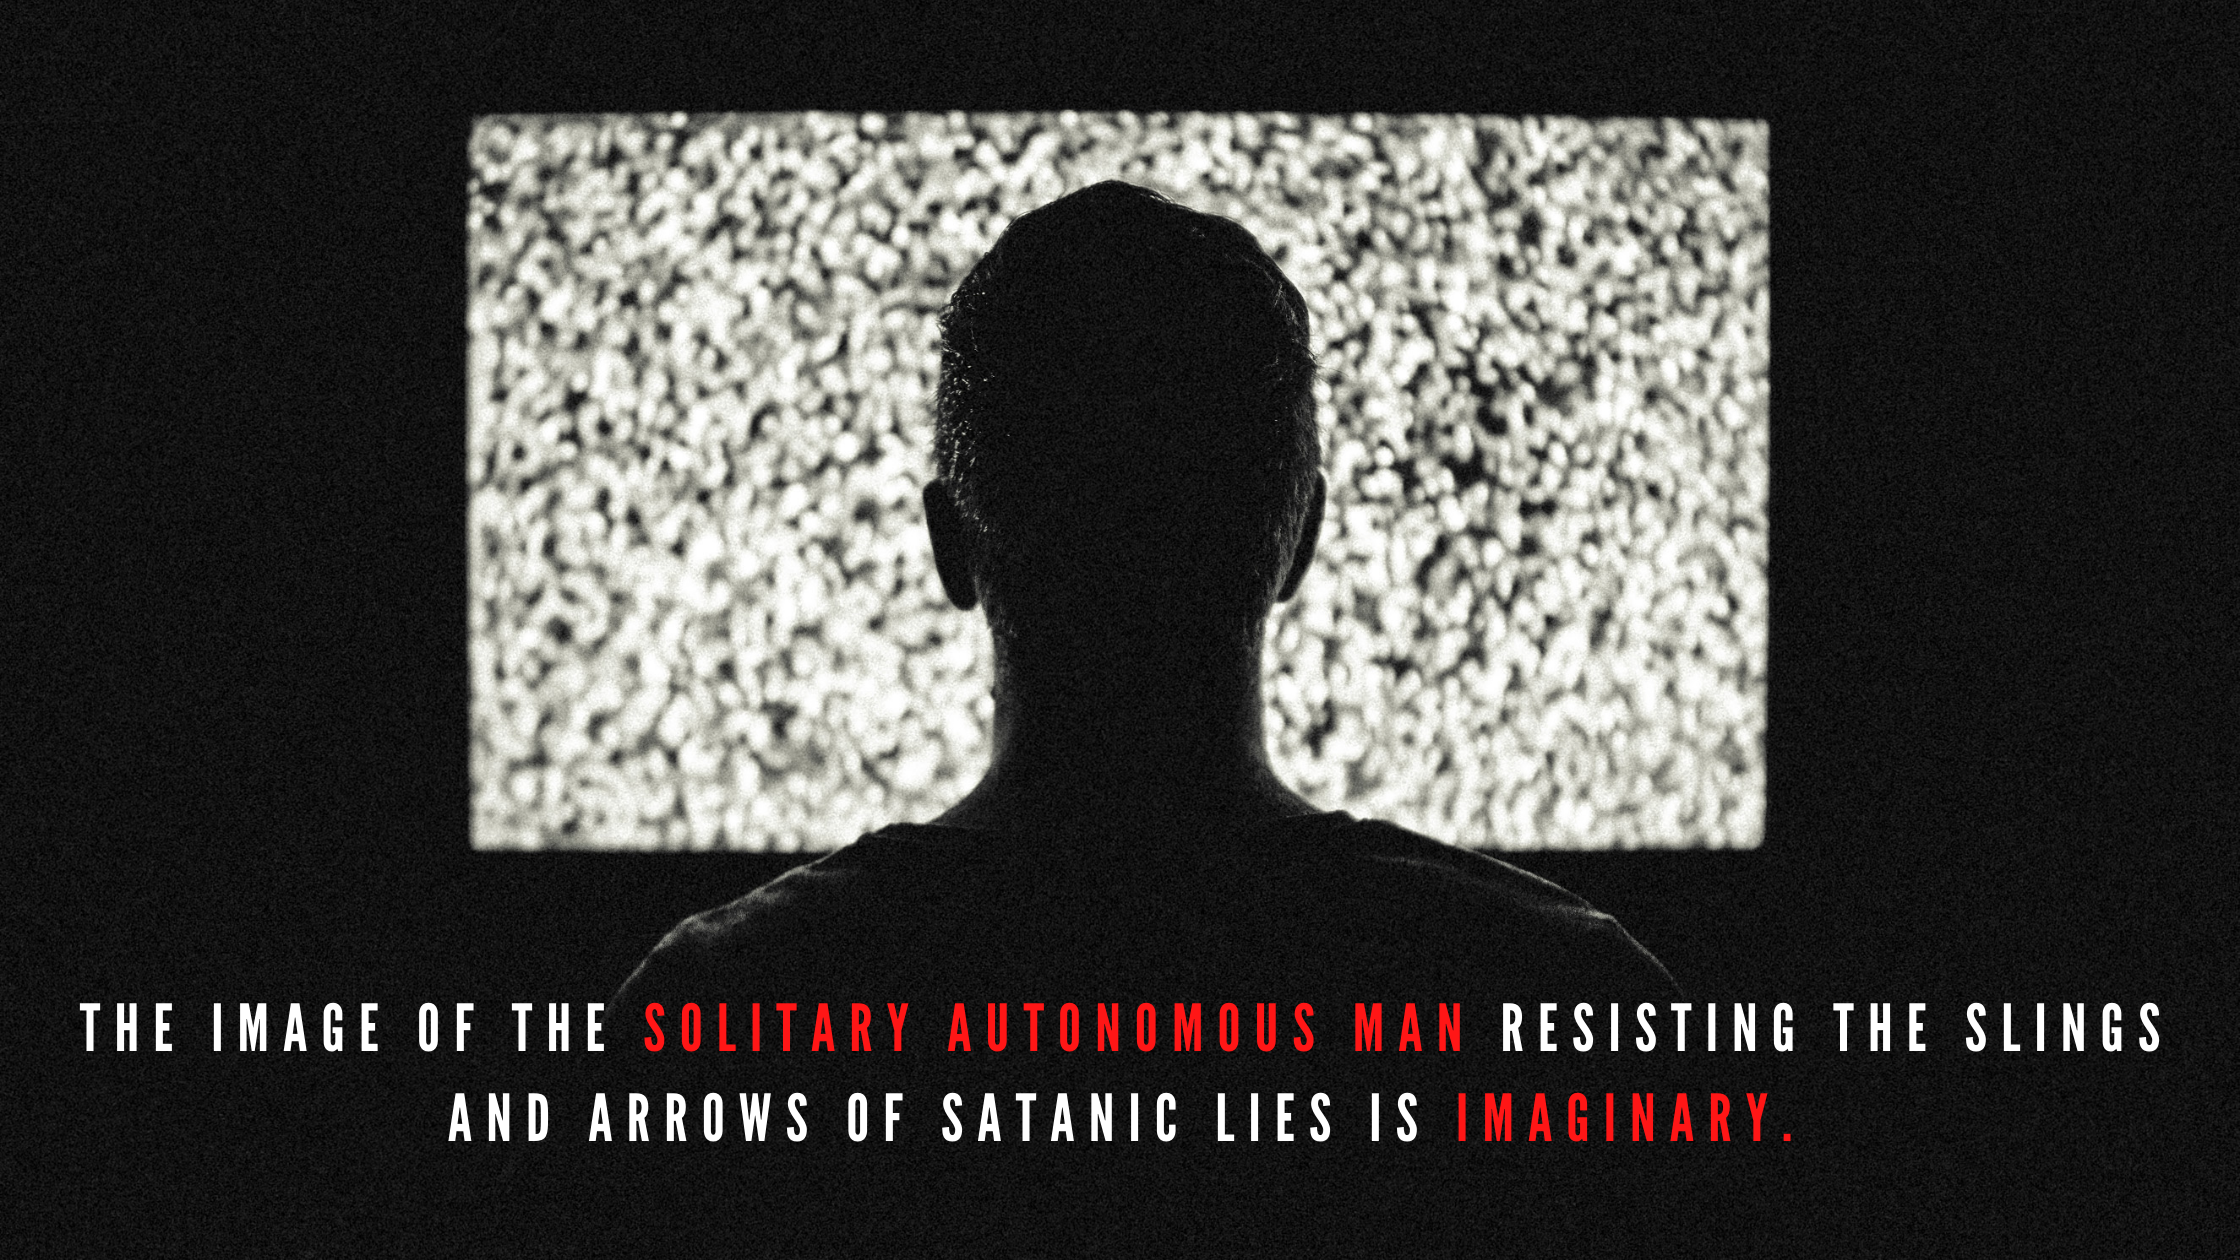 The image of the solitary autonomous man resisting the slings and arrows of satanic lies is imaginary.